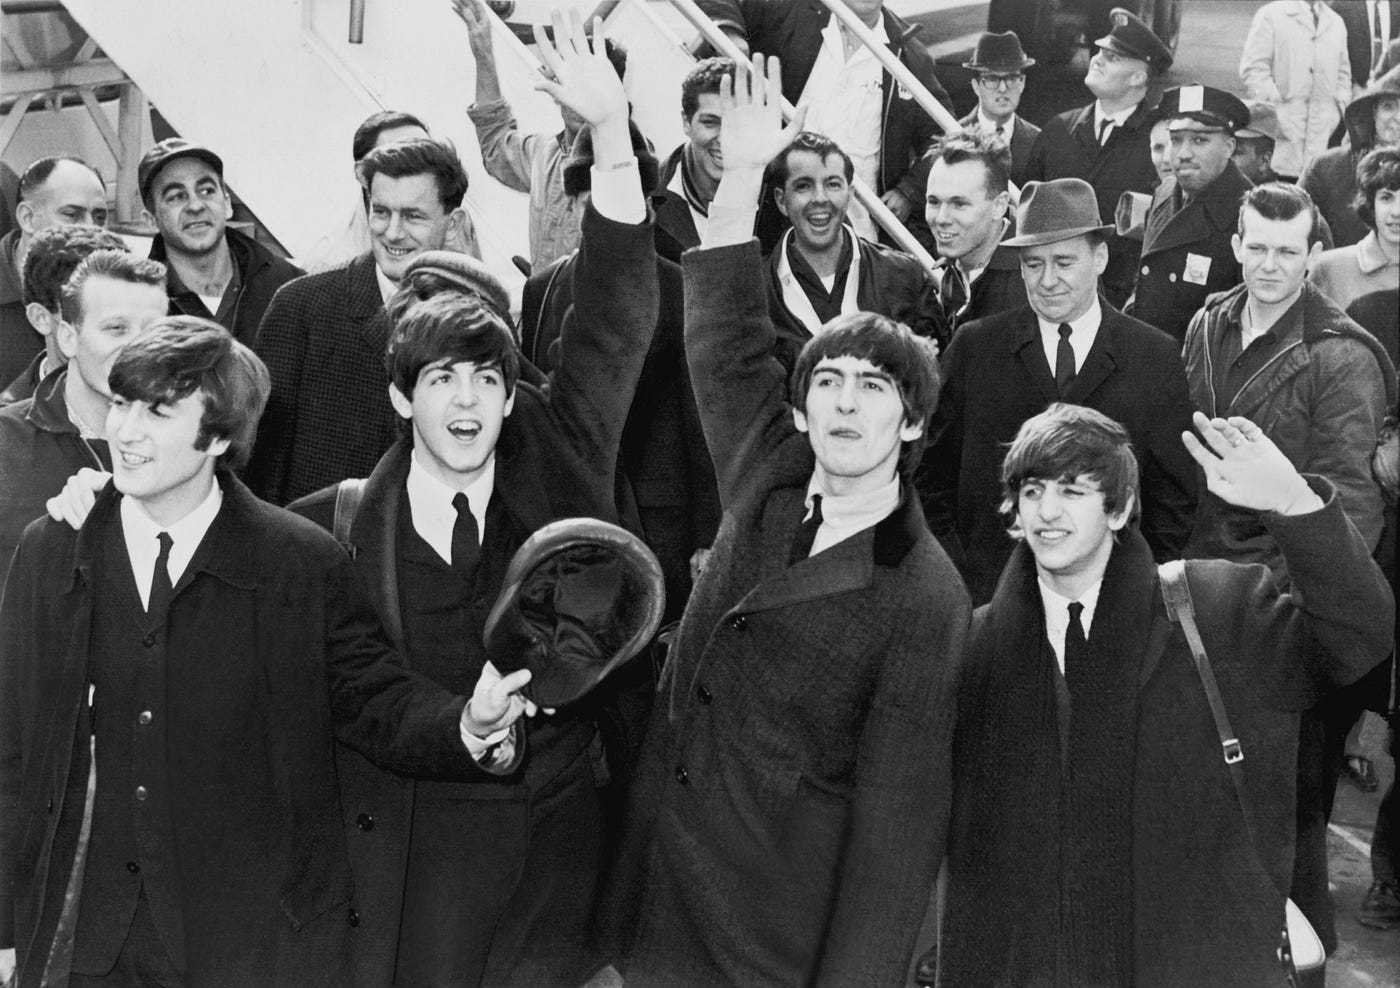 10 Odd, Weird, and Kinky Facts About The Beatles You Might Ignore by Jose Luis Ontanon Nunez ILLUMINATION Medium image